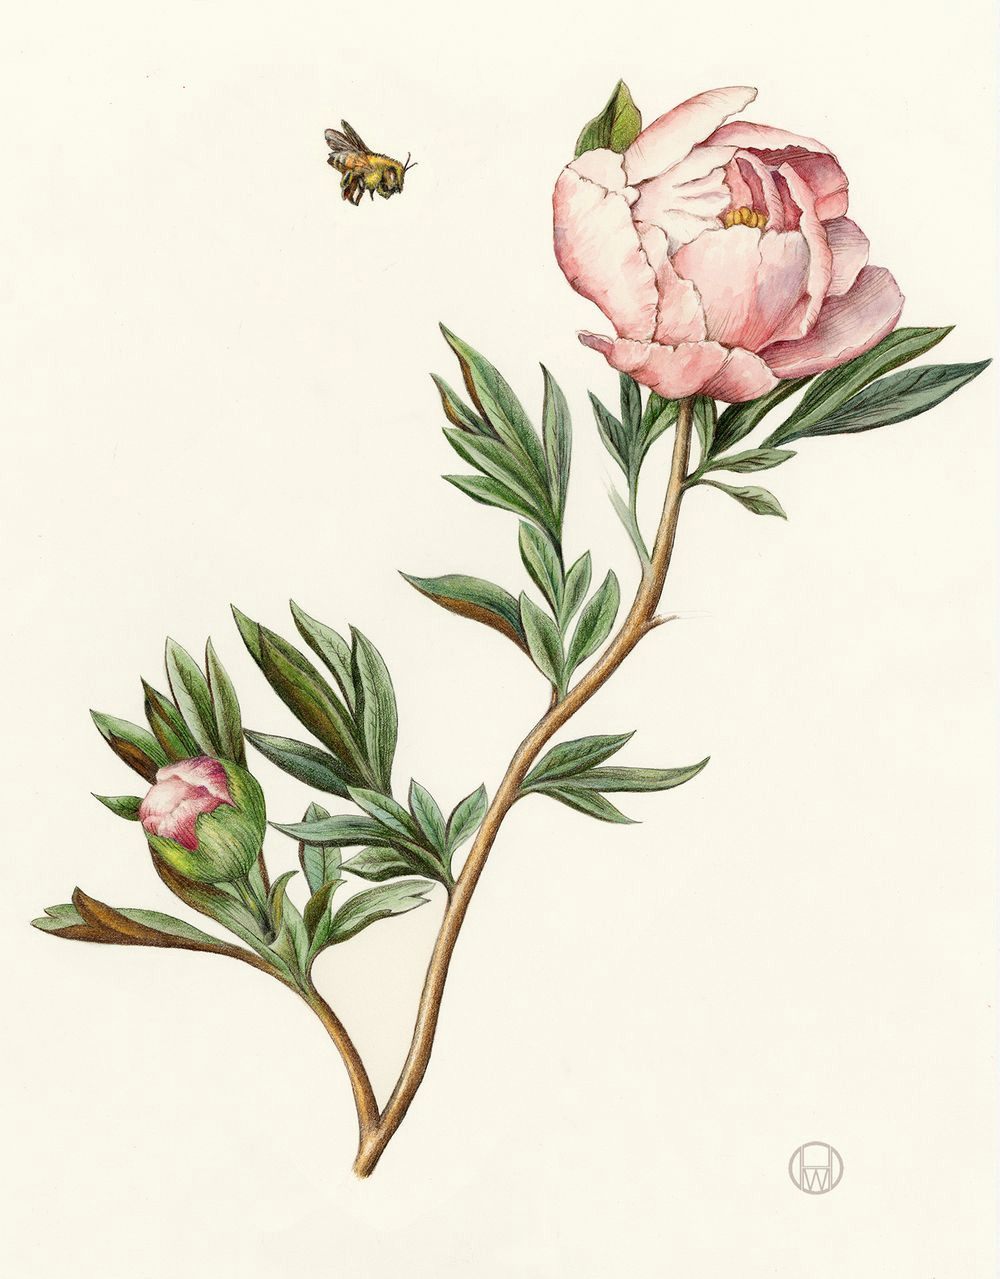 Botanical Drawing Of A Rose Peony From the Collection Of Botanical Illustrations Of Flowers by